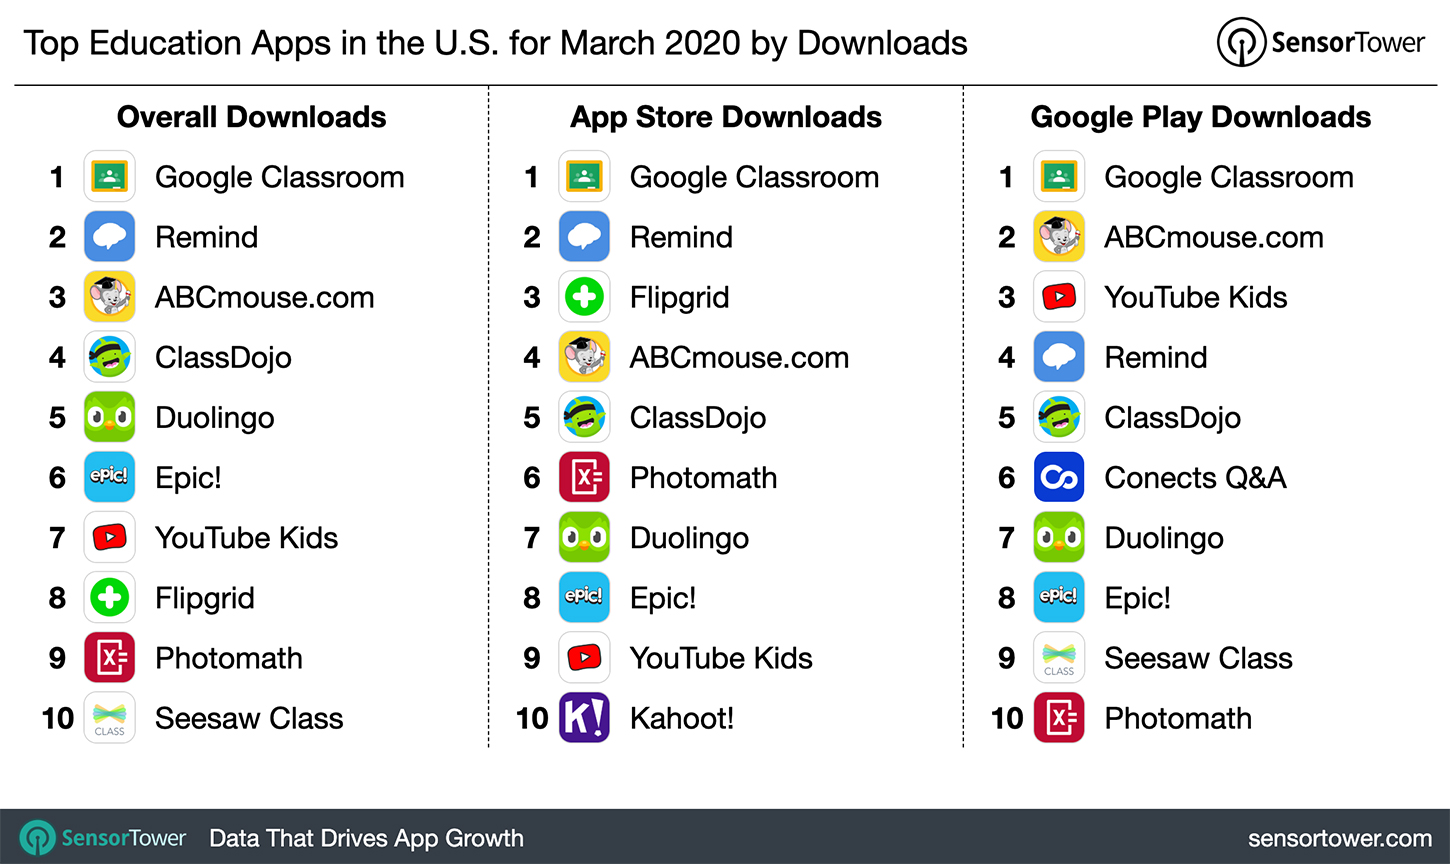 Top Education Apps in the U.S. for March 2020 by Downloads